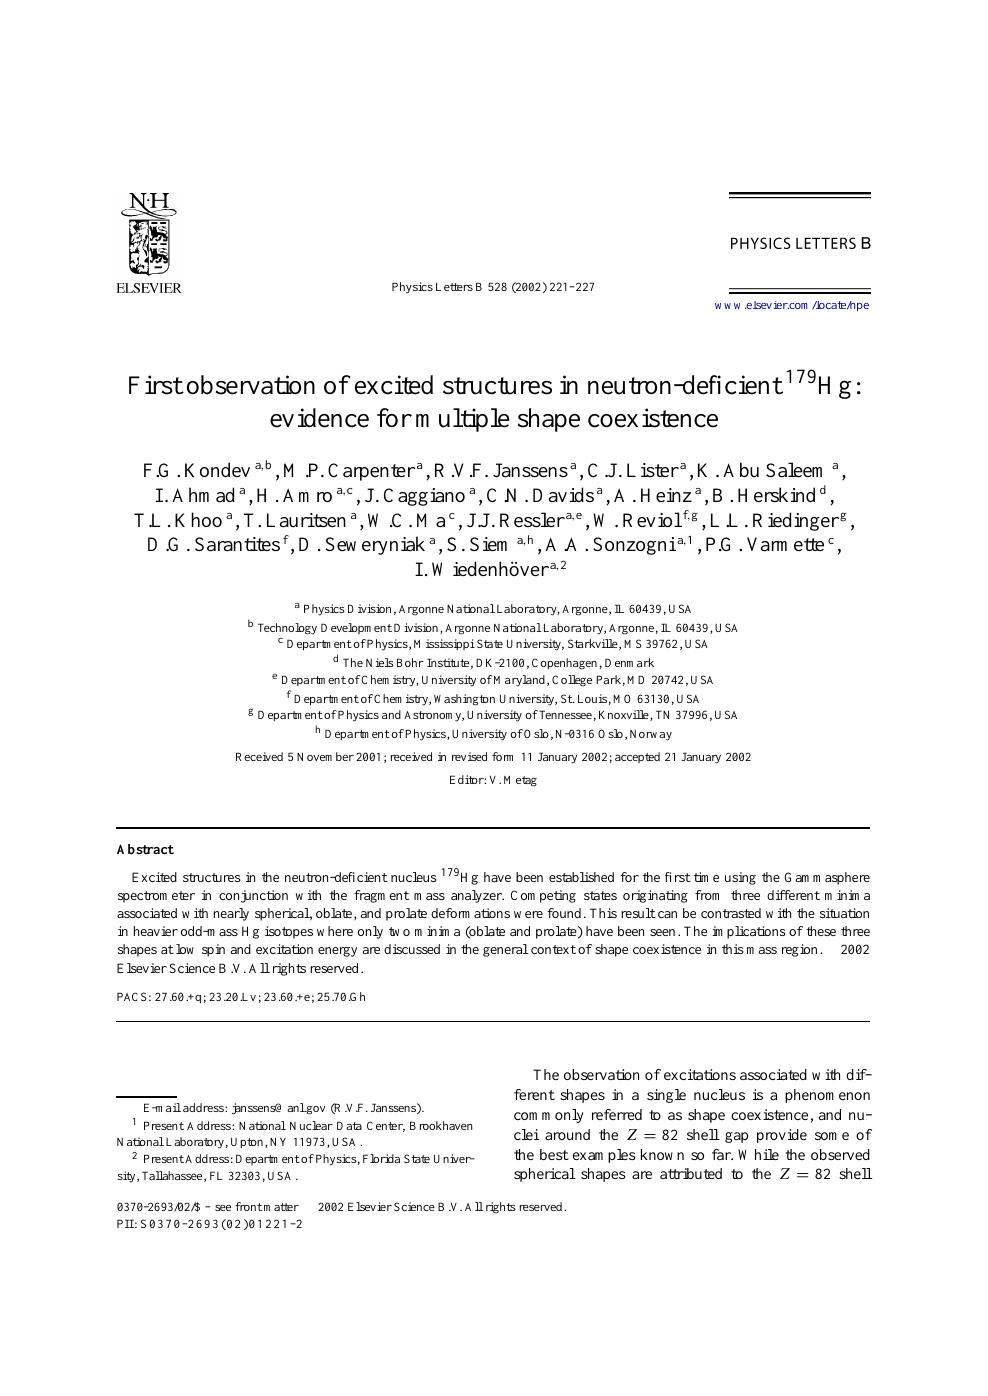 First Observation Of Excited Structures In Neutron Deficient 179hg Evidence For Multiple Shape Coexistence Topic Of Research Paper In Physical Sciences Download Scholarly Article Pdf And Read For Free On Cyberleninka Open